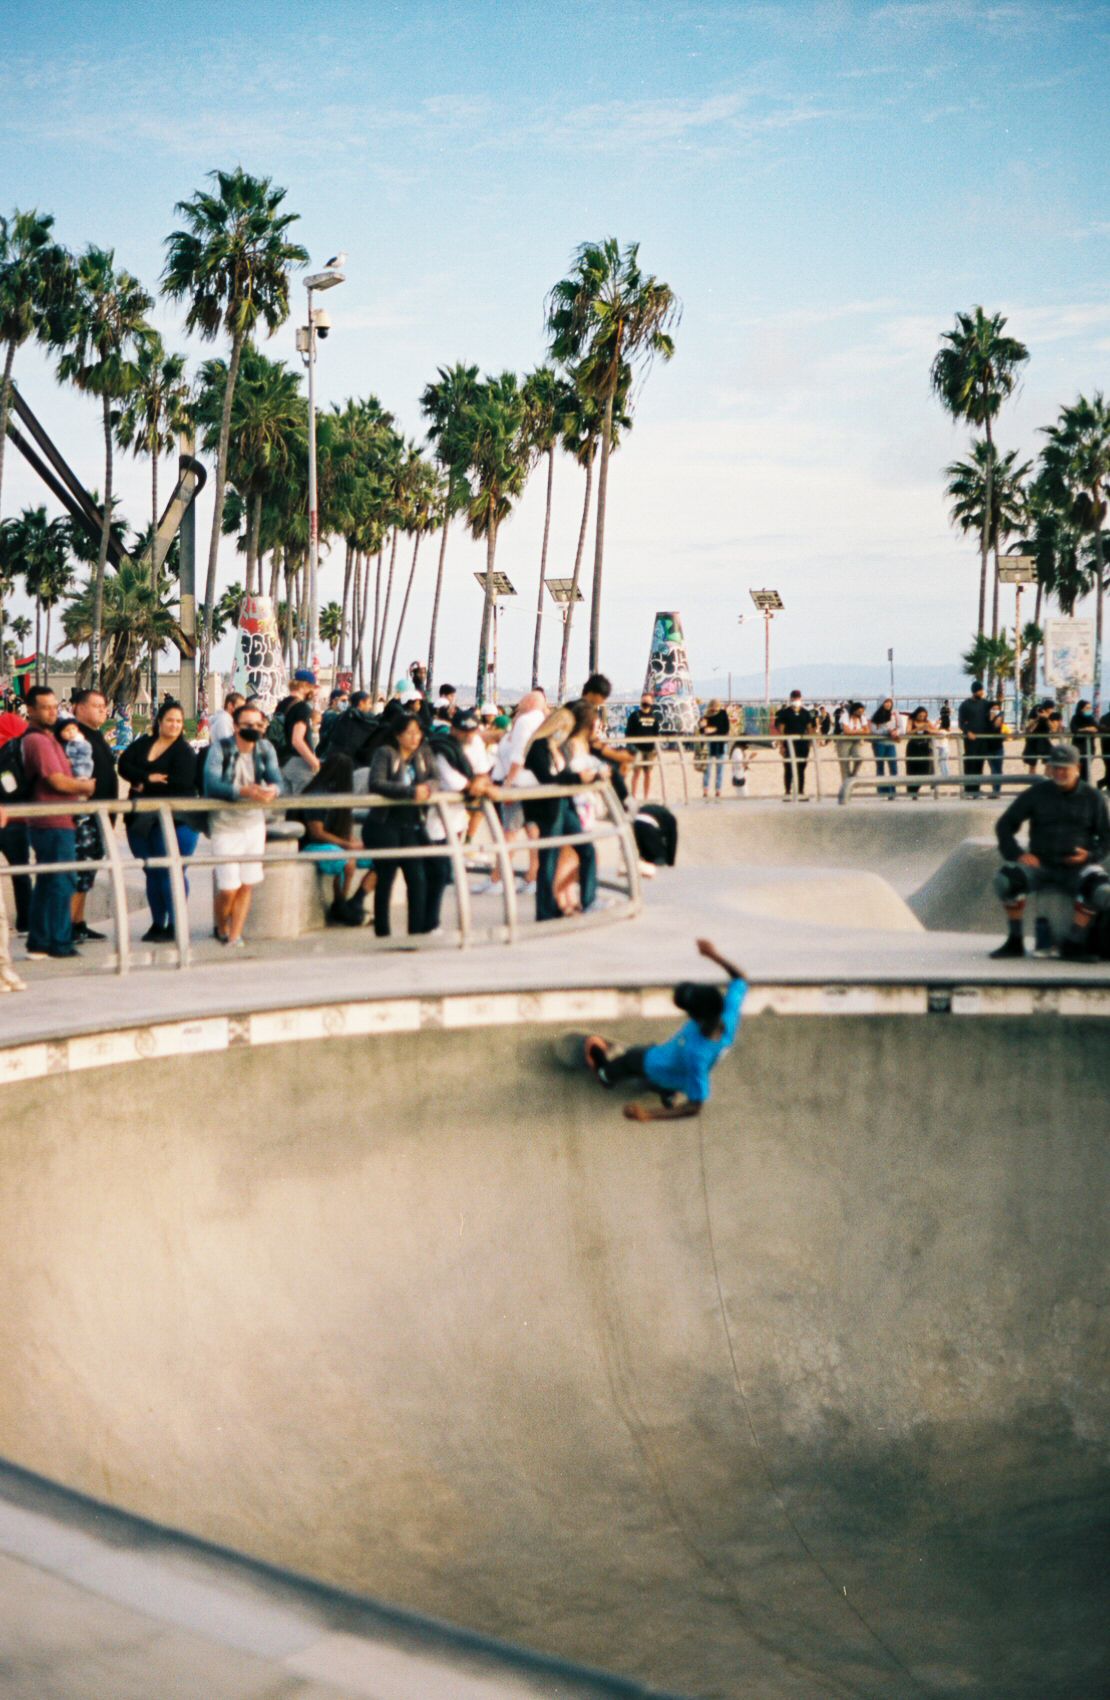 A skateboarder skates a pool at the skate park in Venice Beach as a crowd of people watches.